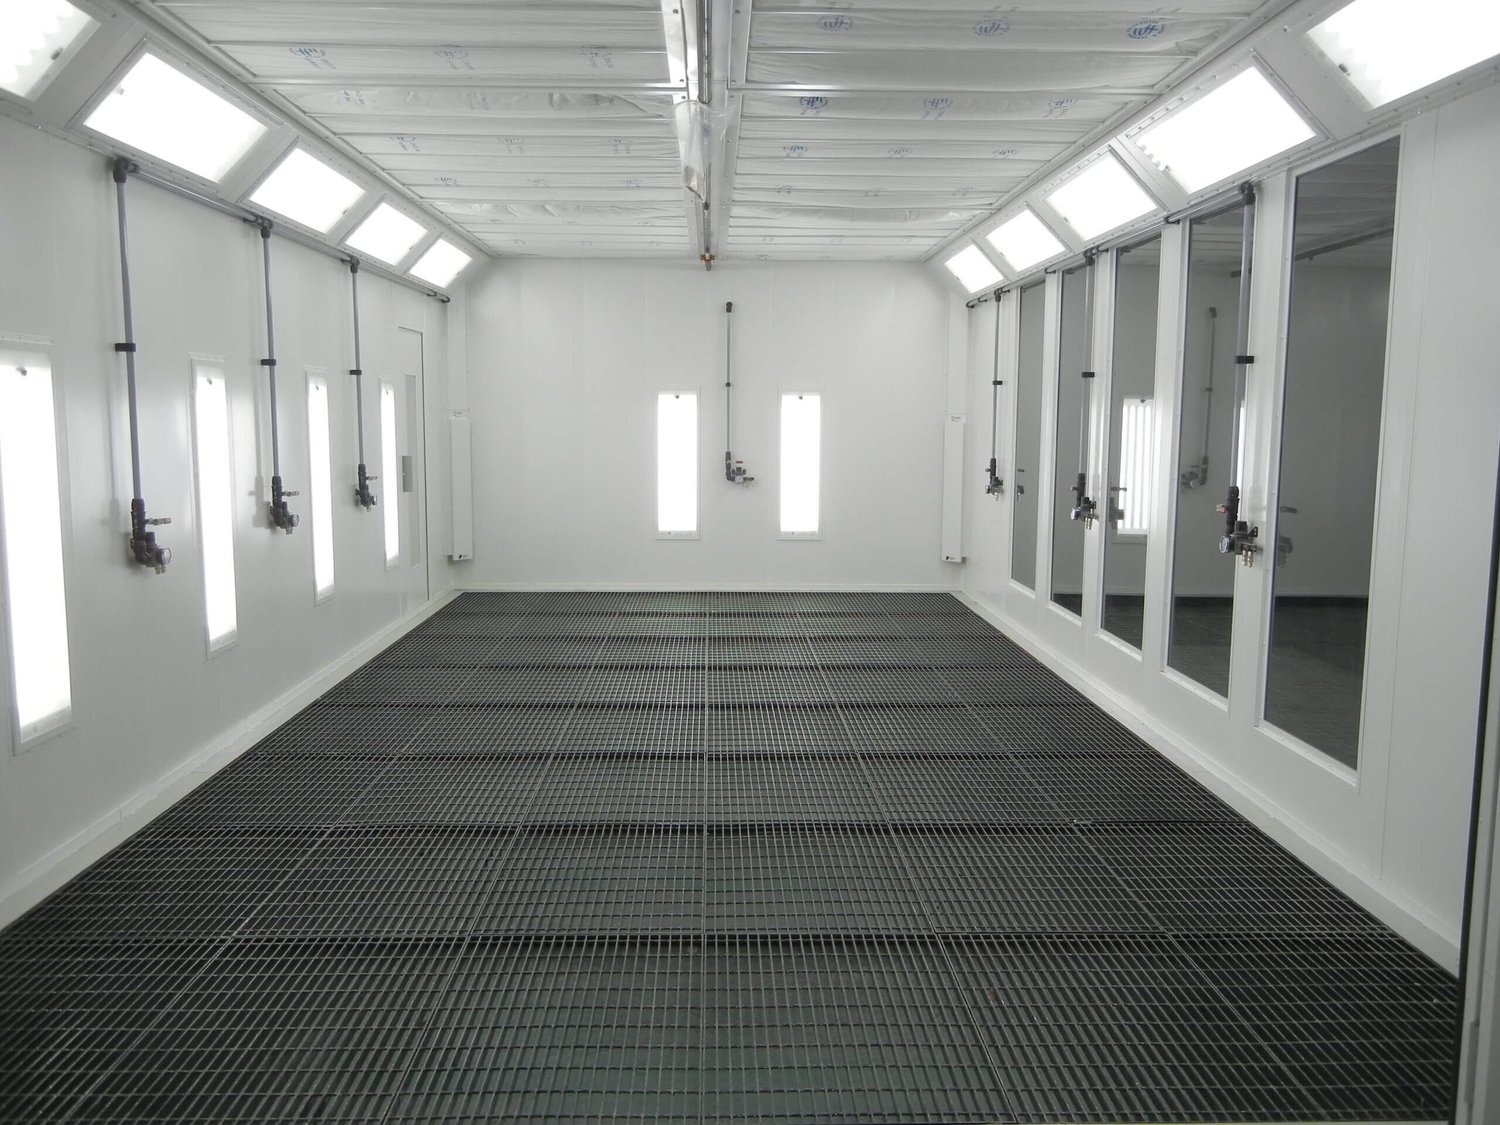 Enhance Paint Booth Safety with inControl Systems' Fire